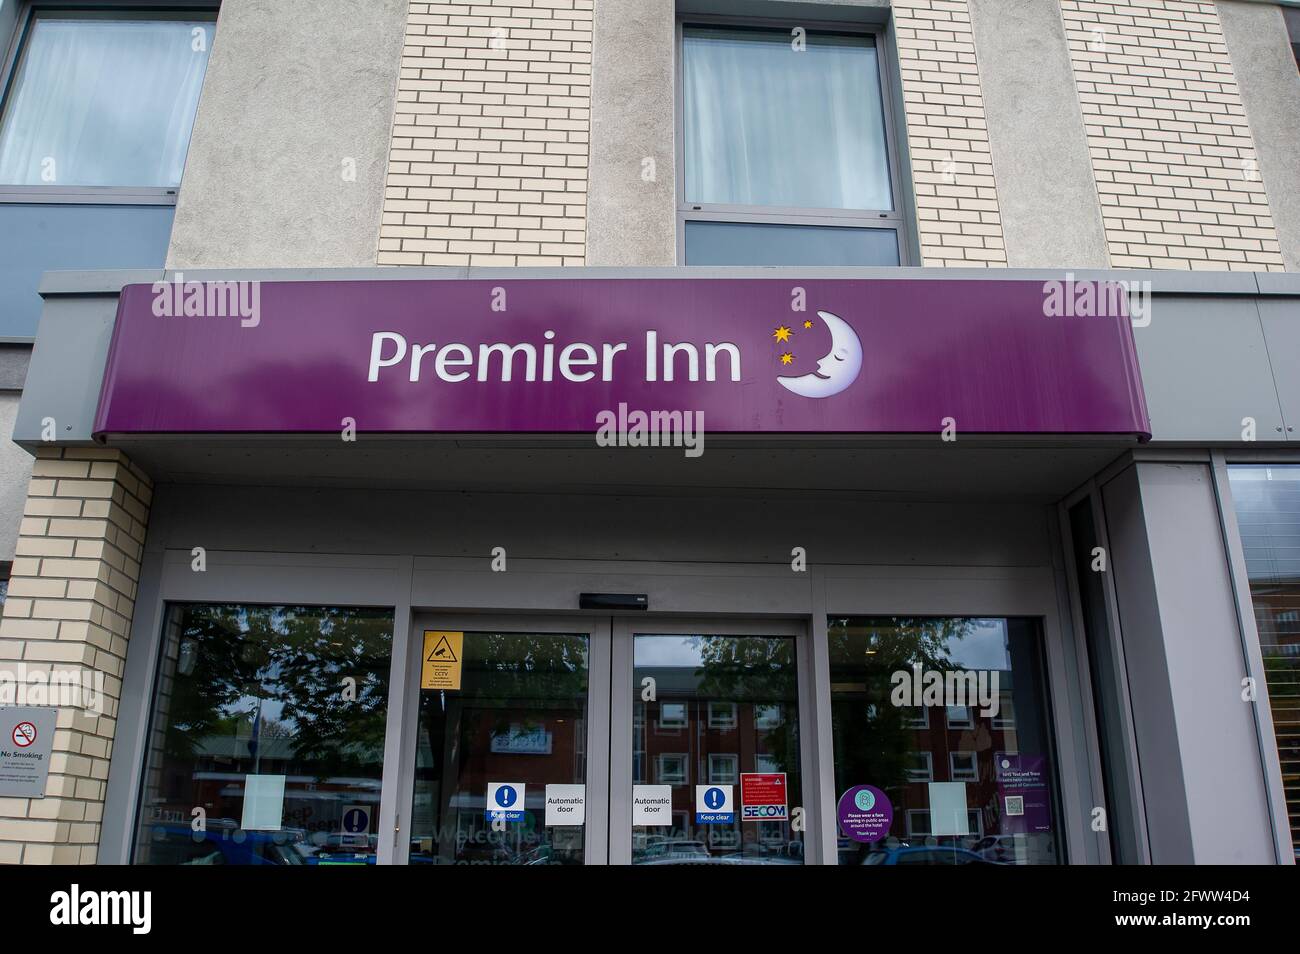 Slough, Berkshire, UK. 23rd May, 2021. The Premier Inn has reopened to customers following the easing of the Covid-19 restrictions. Shoppers out in Slough High Street today. The Covid-19 seven day rolling infection rates per 100,000 people in Slough for the week ending May 18 has risen to 25.4, up from 22.7. Given that the number of positive Covid-19 Indian variant cases are starting to rise, the possibly of the entire lifting of lockdown restrictions in June may now be in jeopardy. Credit: Maureen McLean/Alamy Stock Photo